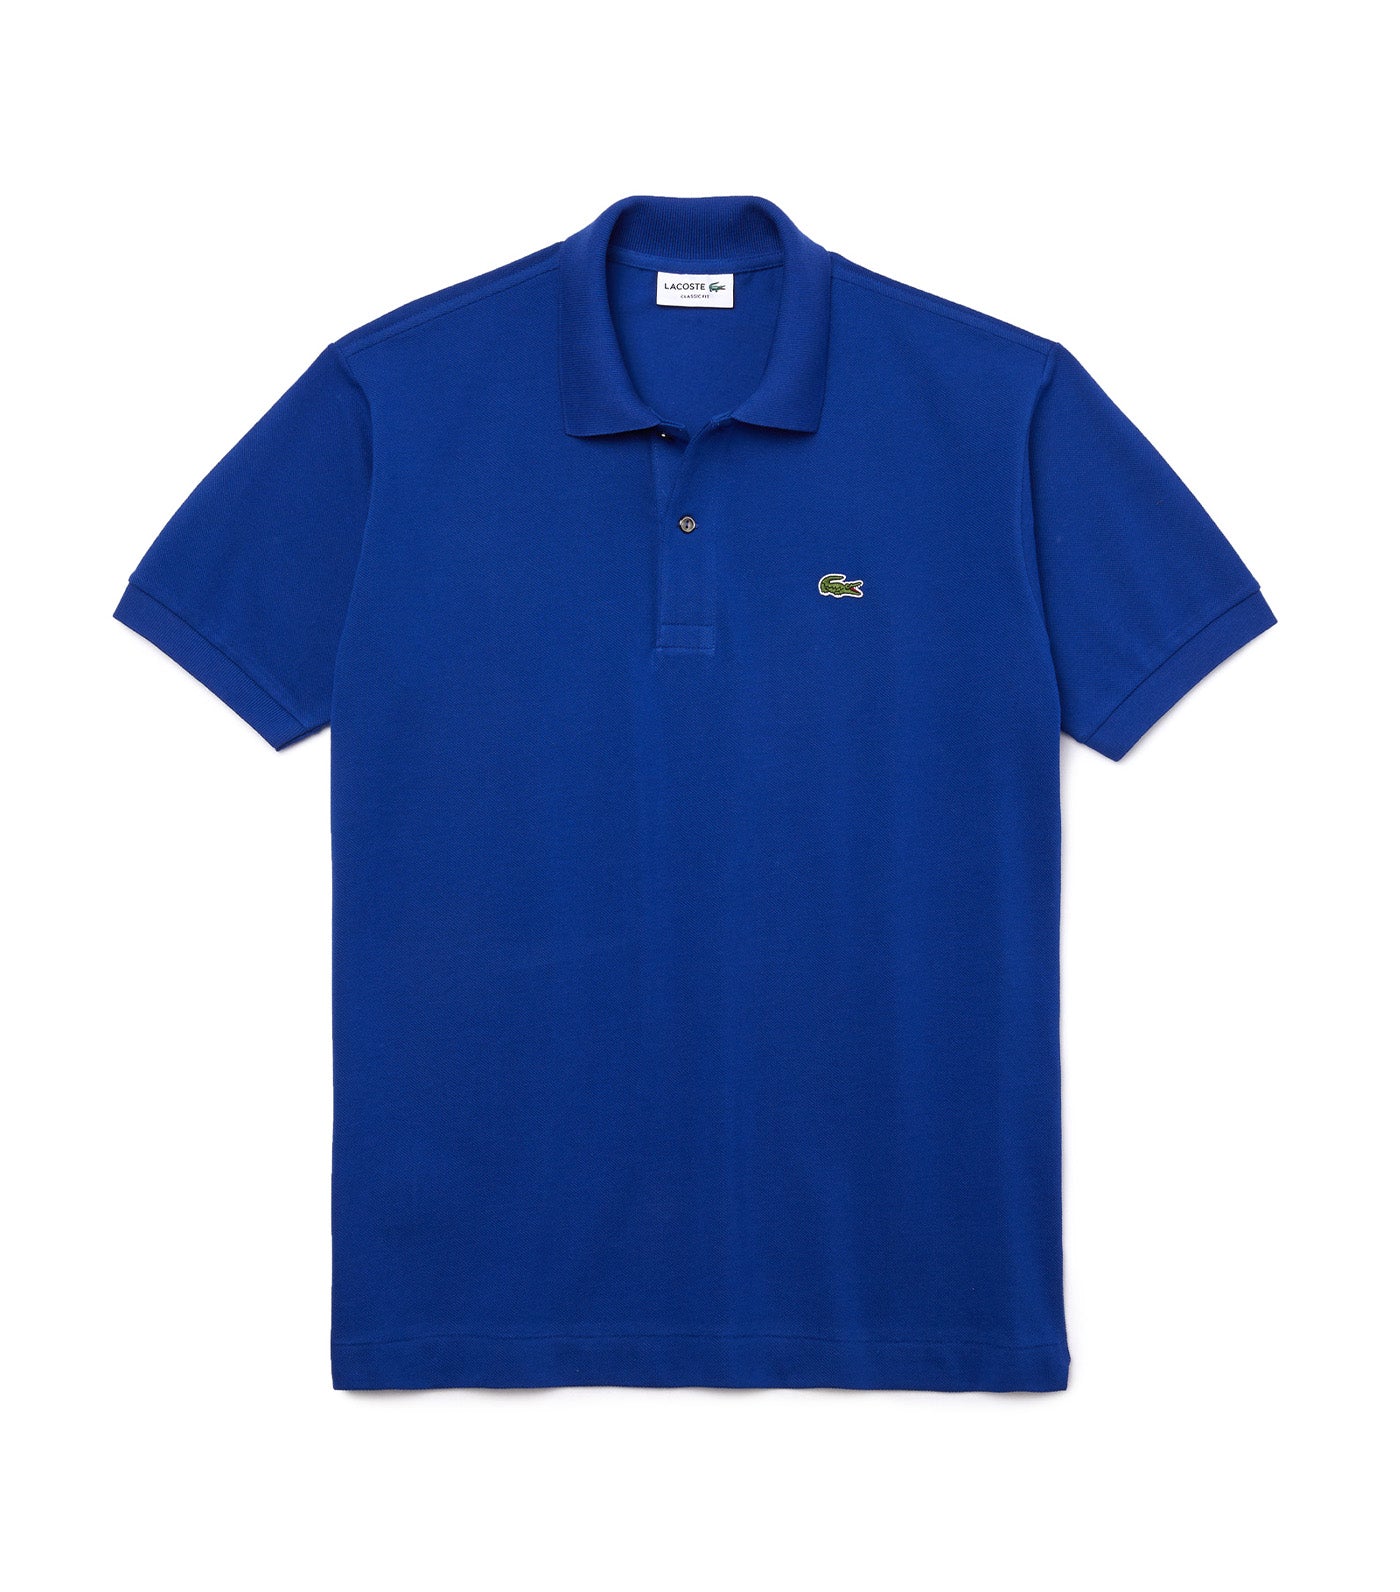 Lacoste Classic Fit L.12.12 Polo Shirt Cosmic